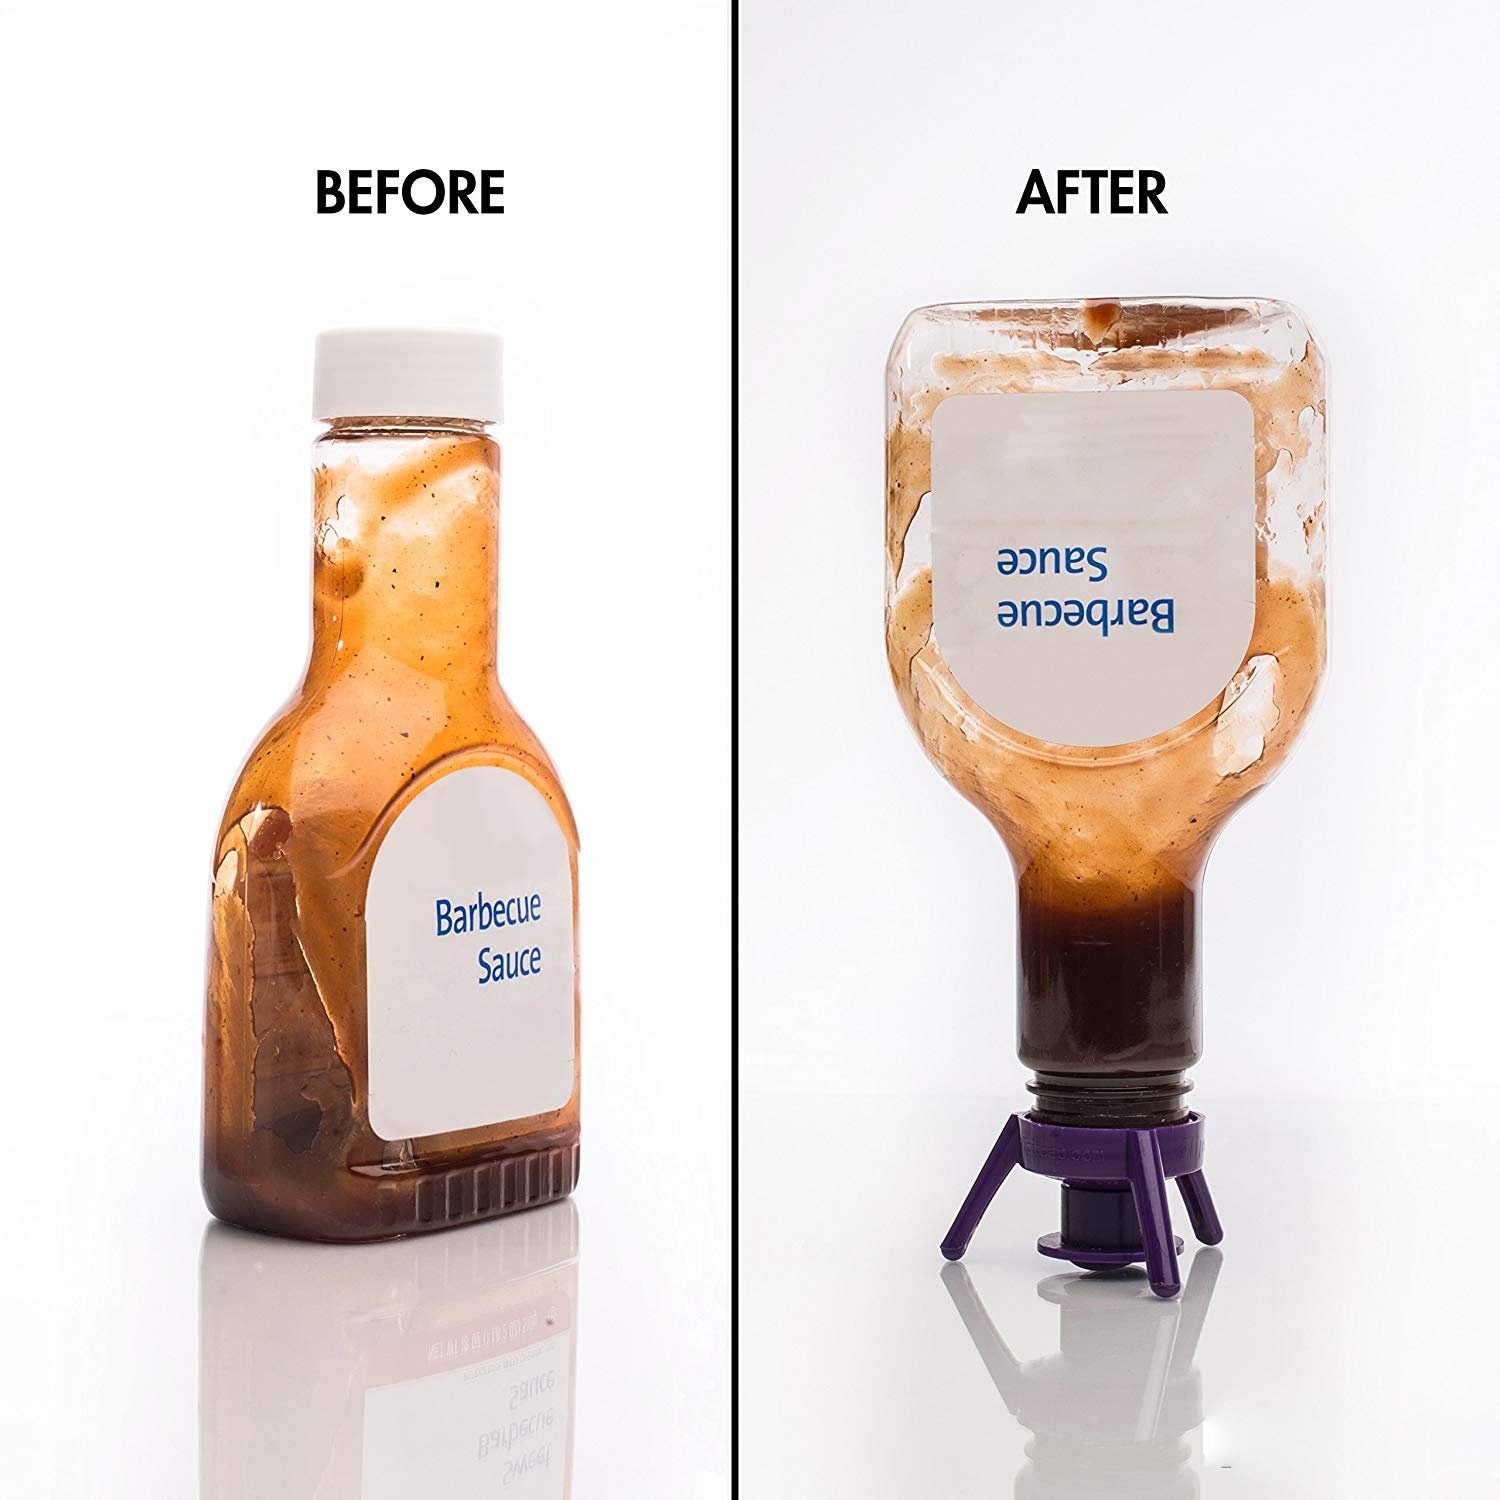 Before and after images of a bottle of BBQ sauce using the bottle-emptying stand